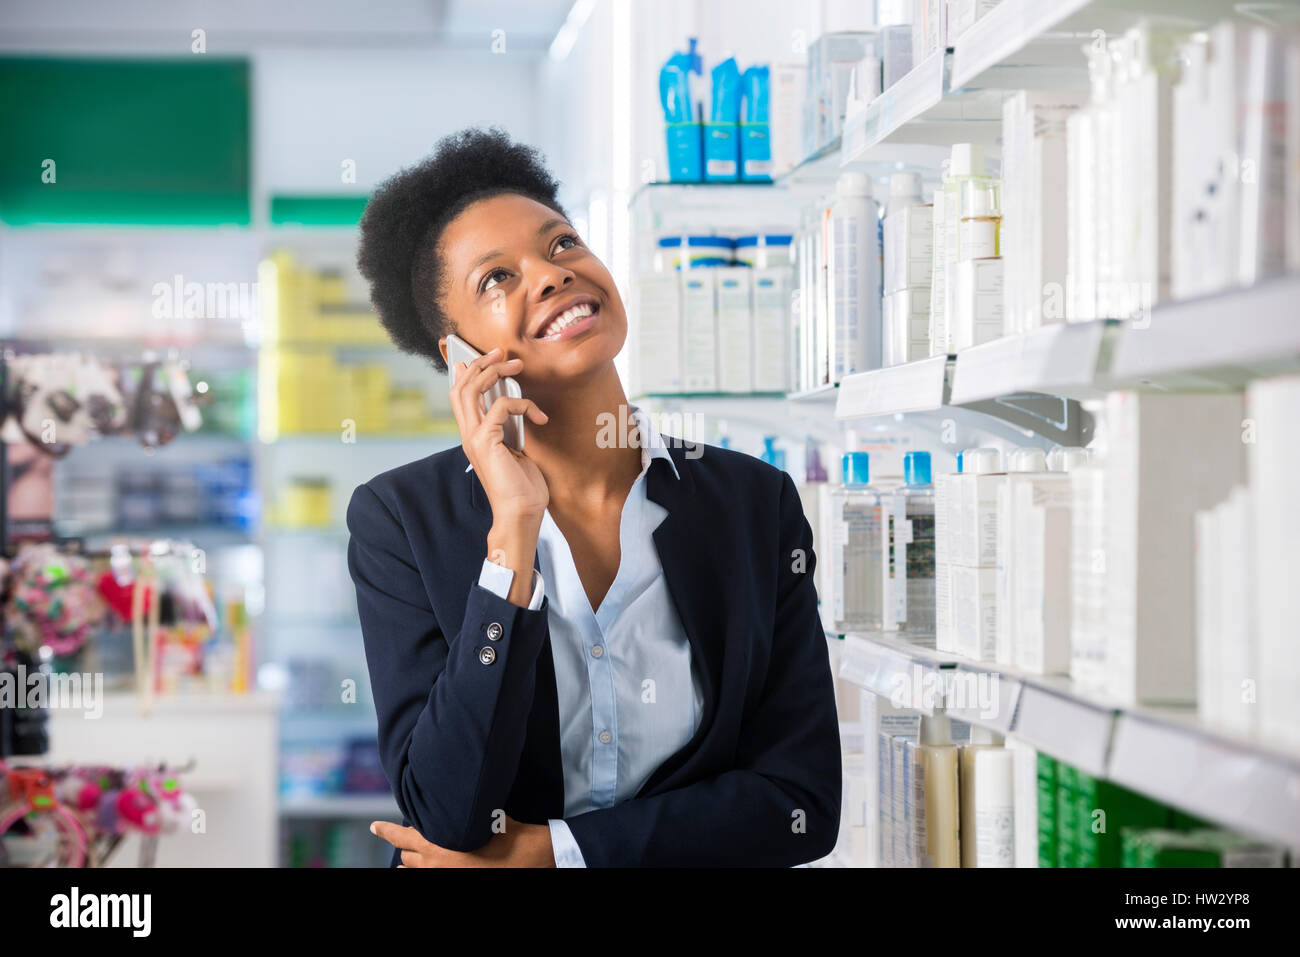 Smiling young businesswoman using mobile phone in pharmacy Banque D'Images